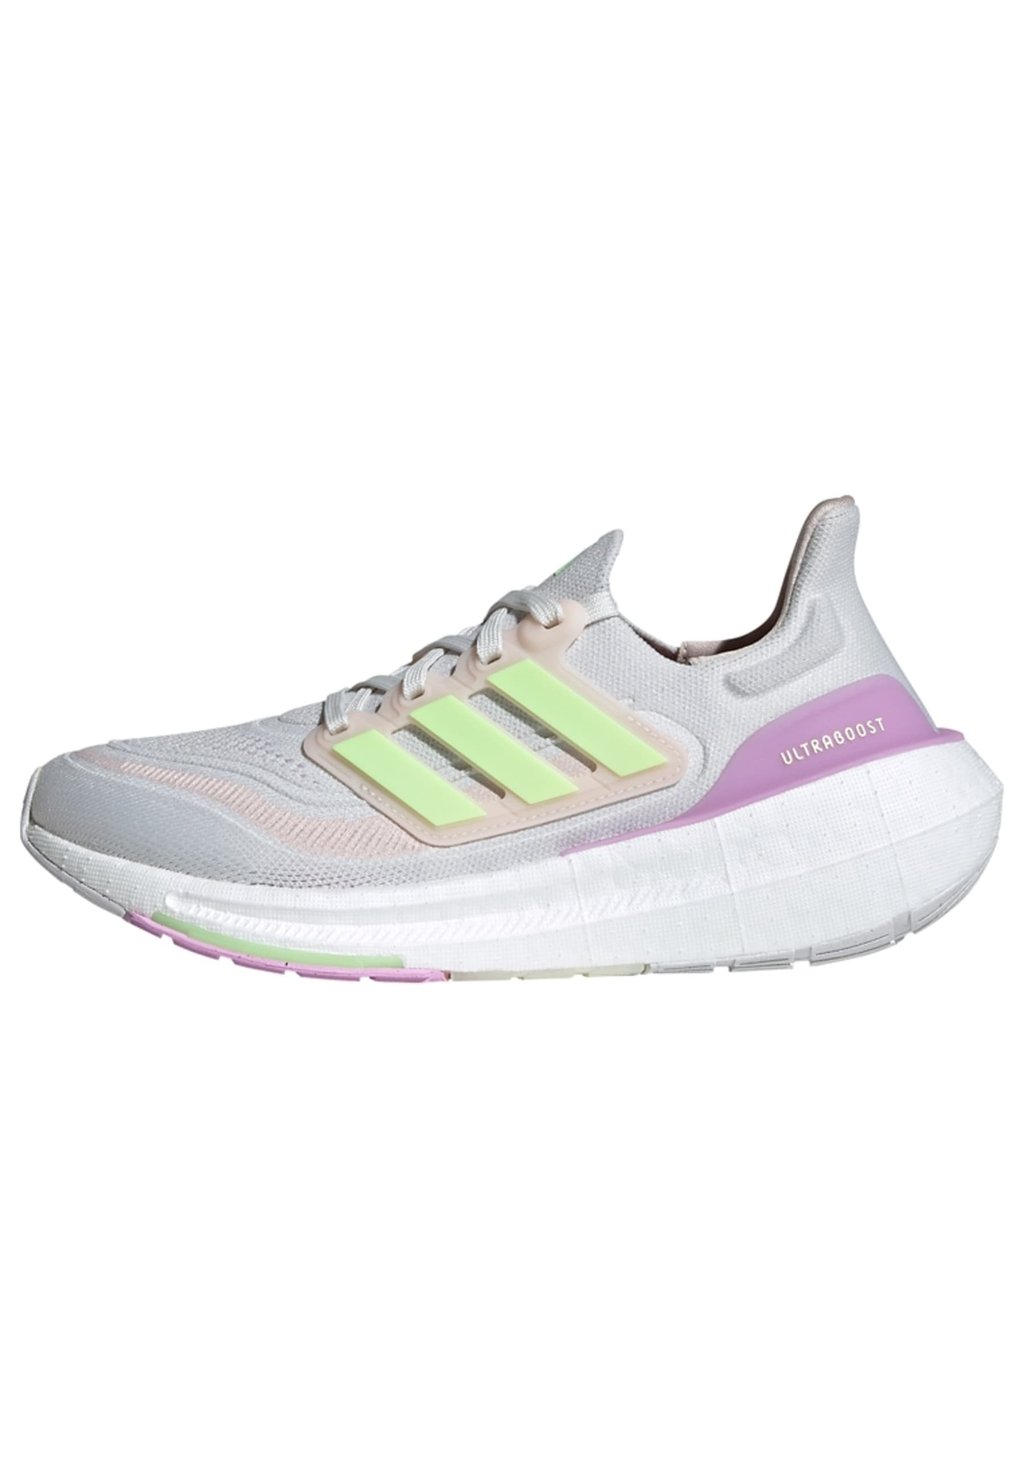 Кроссовки Natural Running ULTRABOOST adidas Performance, цвет crystal white green spark bliss lilac